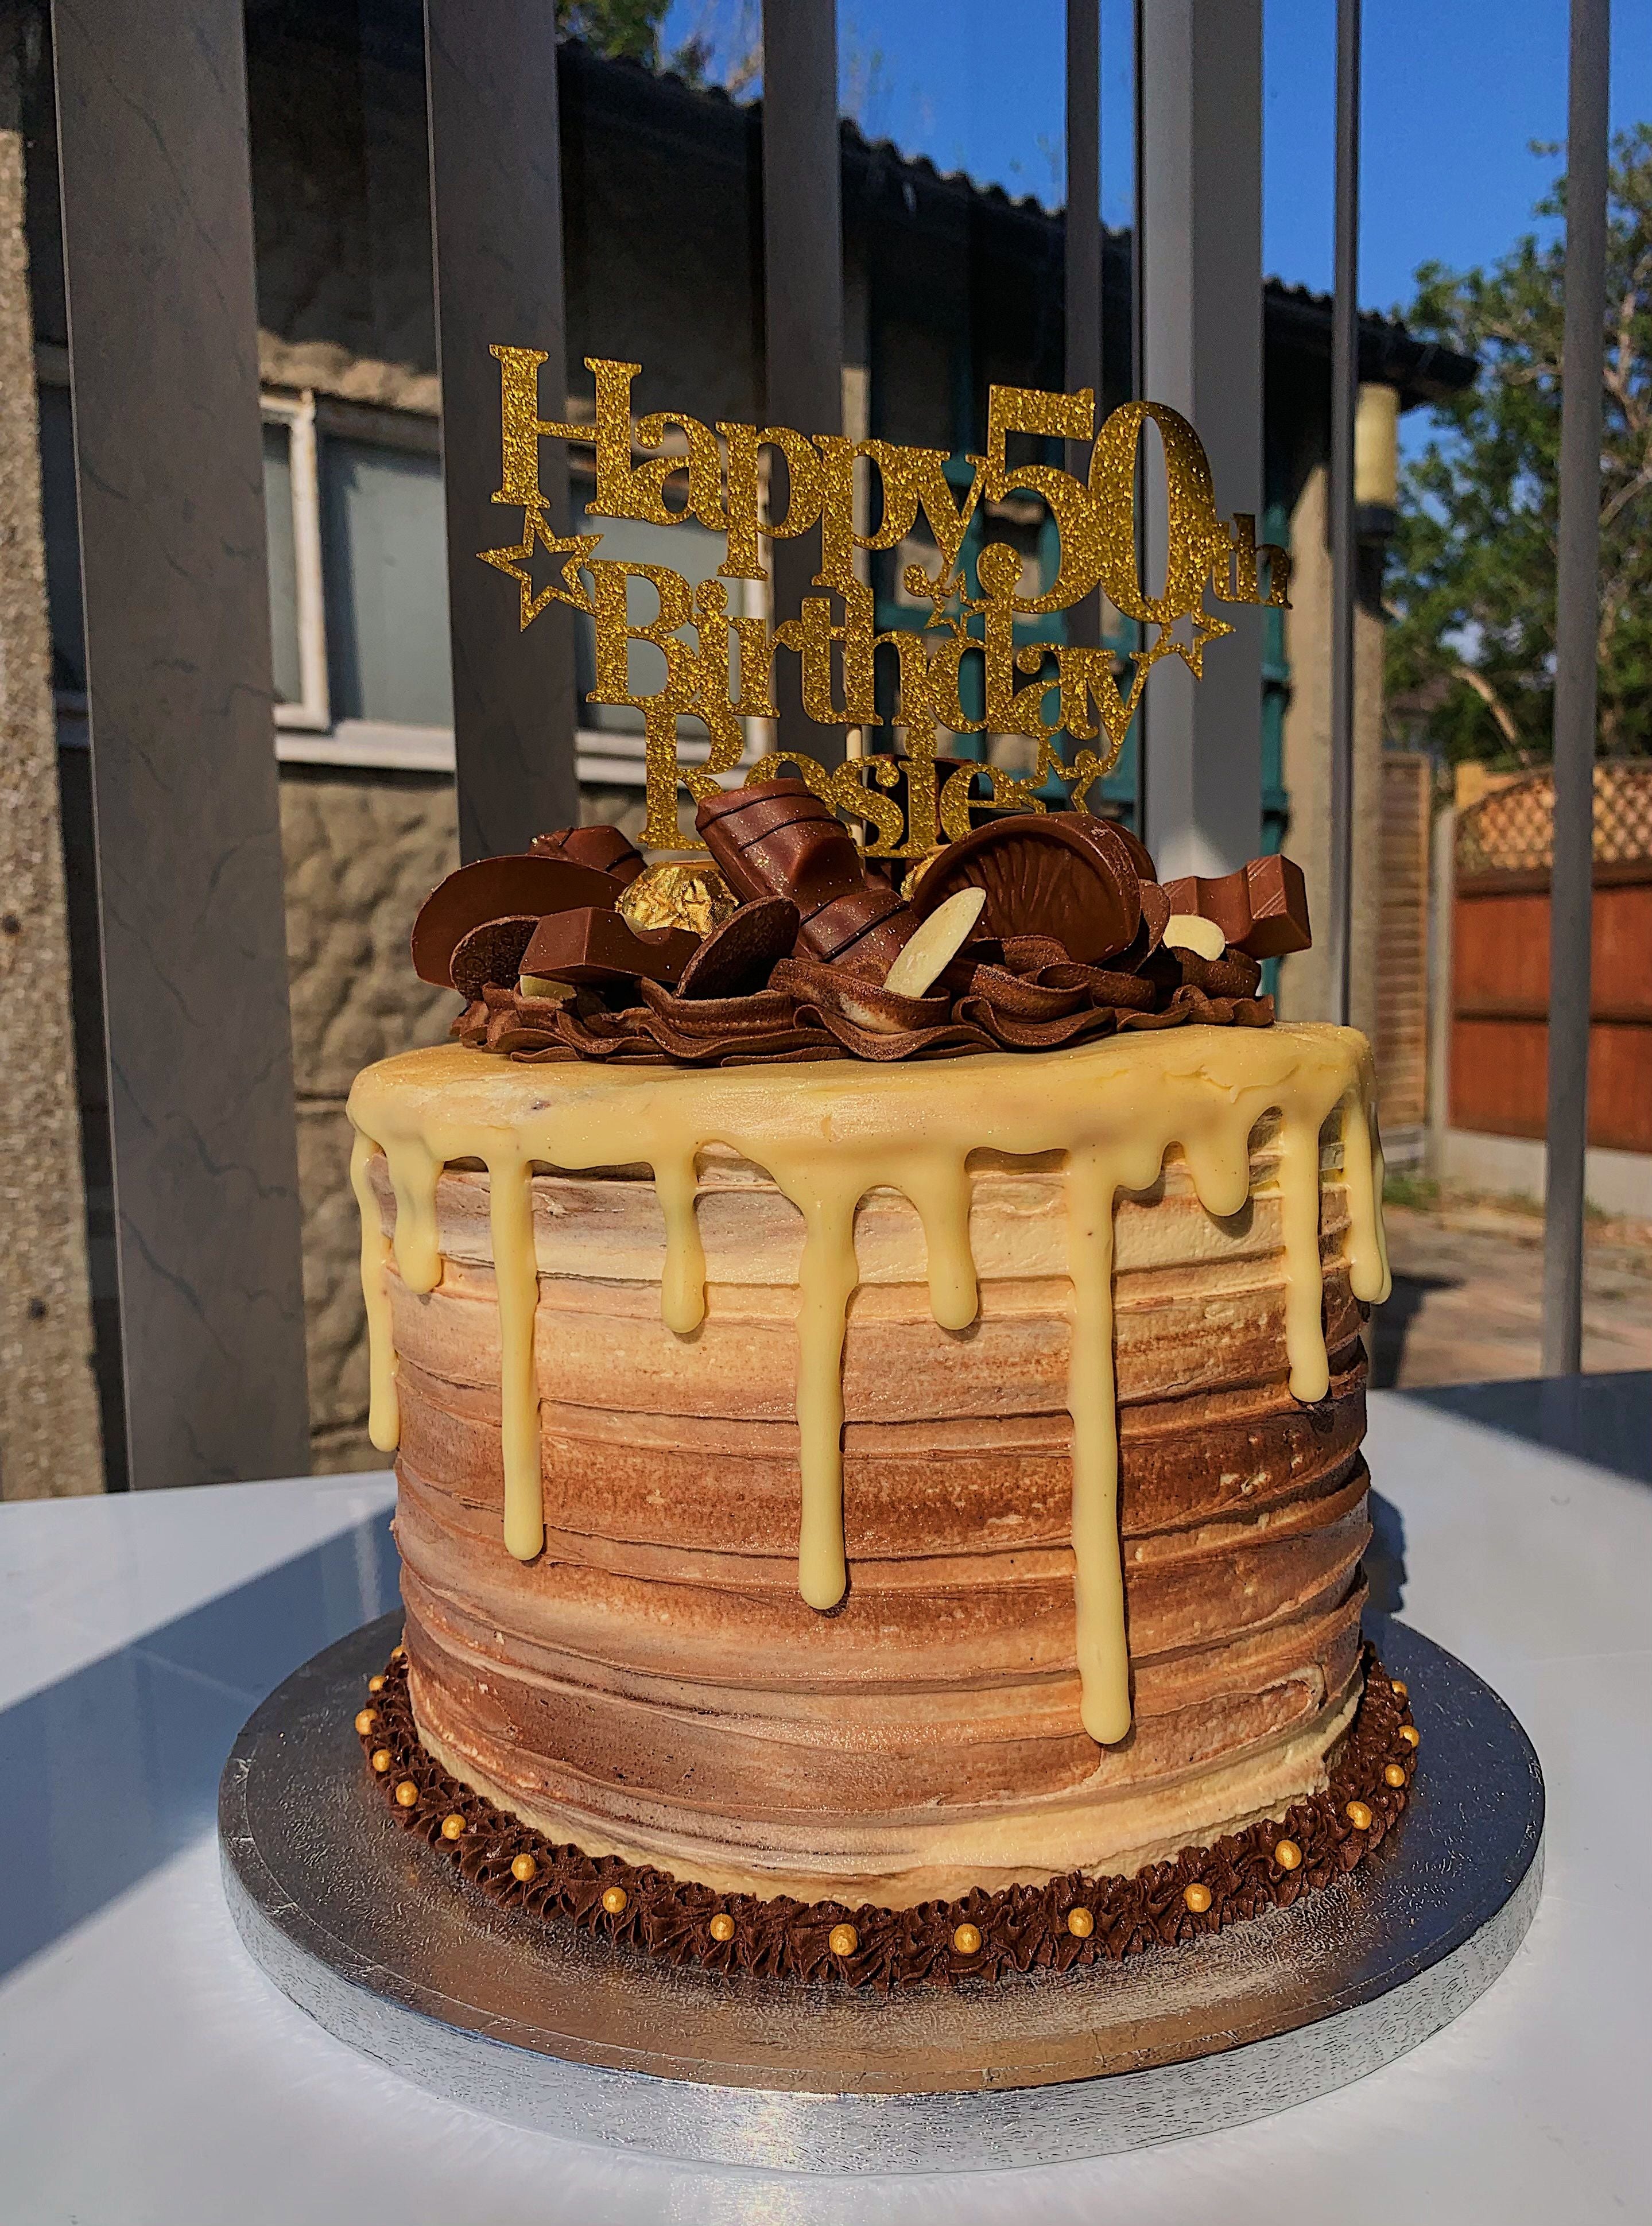 Chocolate cake decorated with Kinder and Ferrero chocolates and Happy 50th Birthday on top